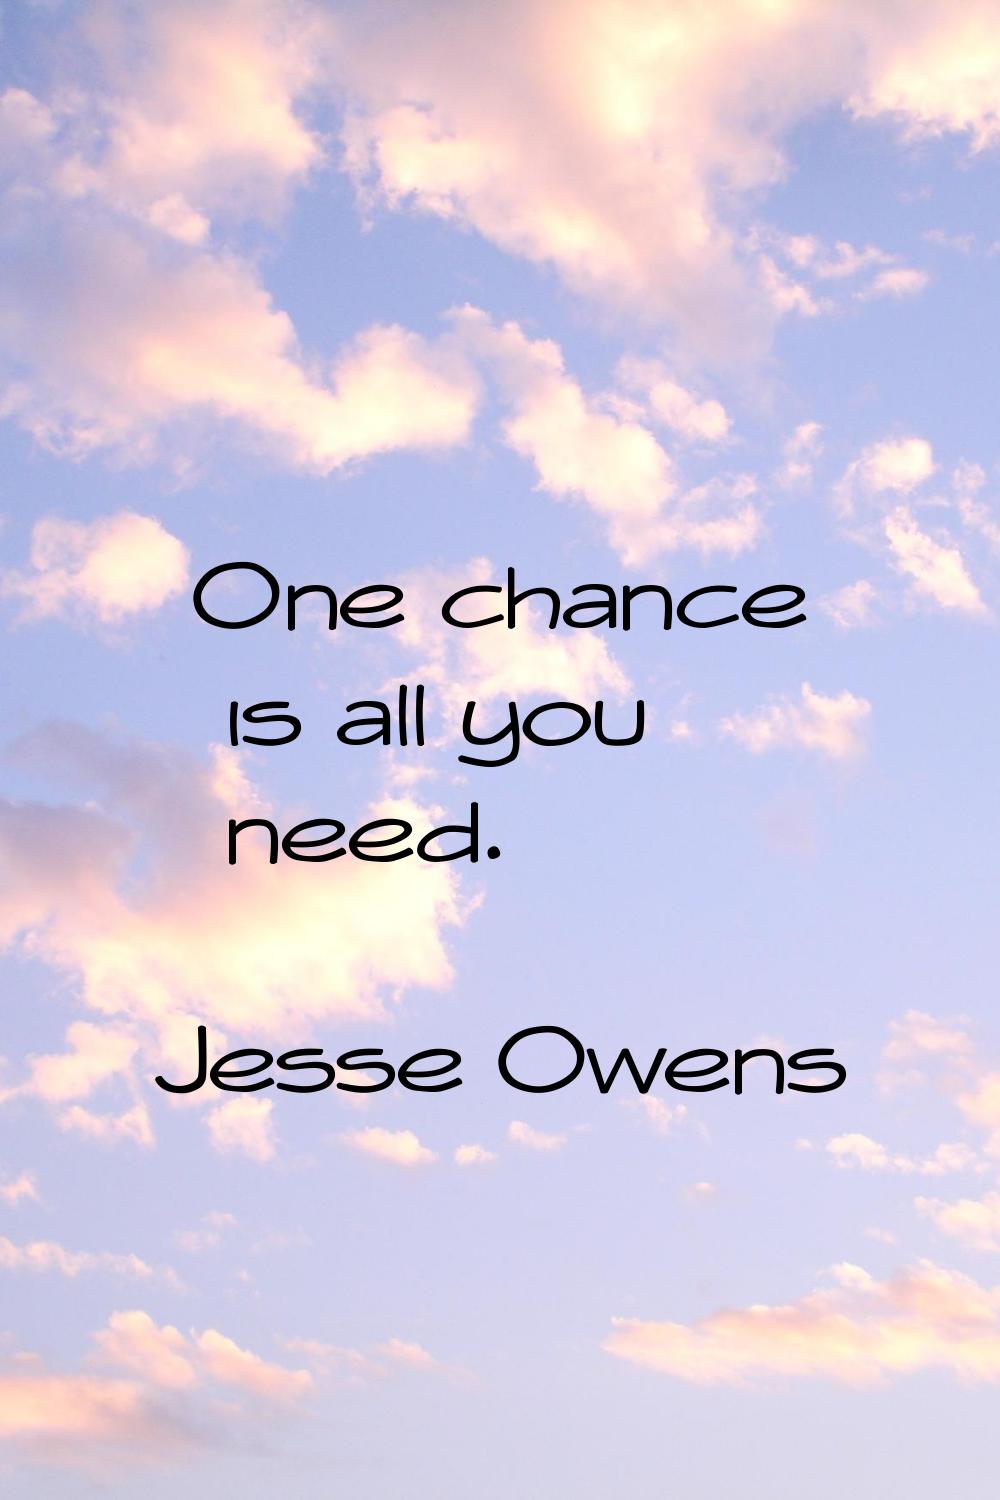 One chance is all you need.